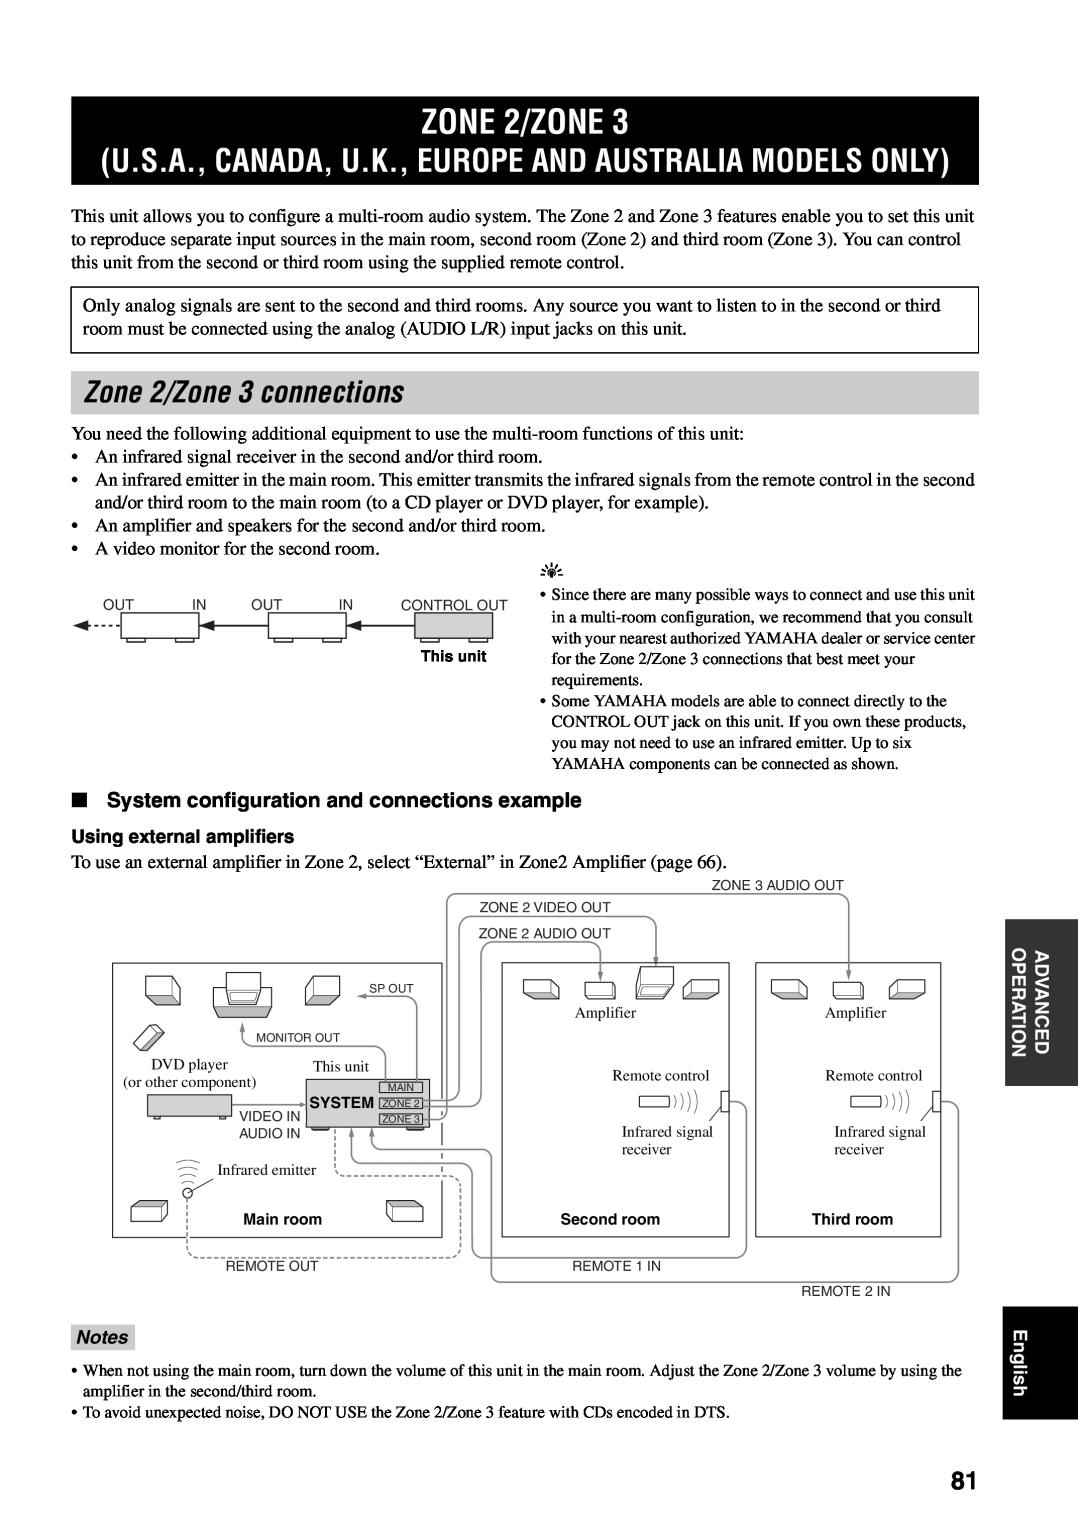 Yamaha RX-V2500 owner manual ZONE 2/ZONE, Zone 2/Zone 3 connections, System configuration and connections example, Notes 